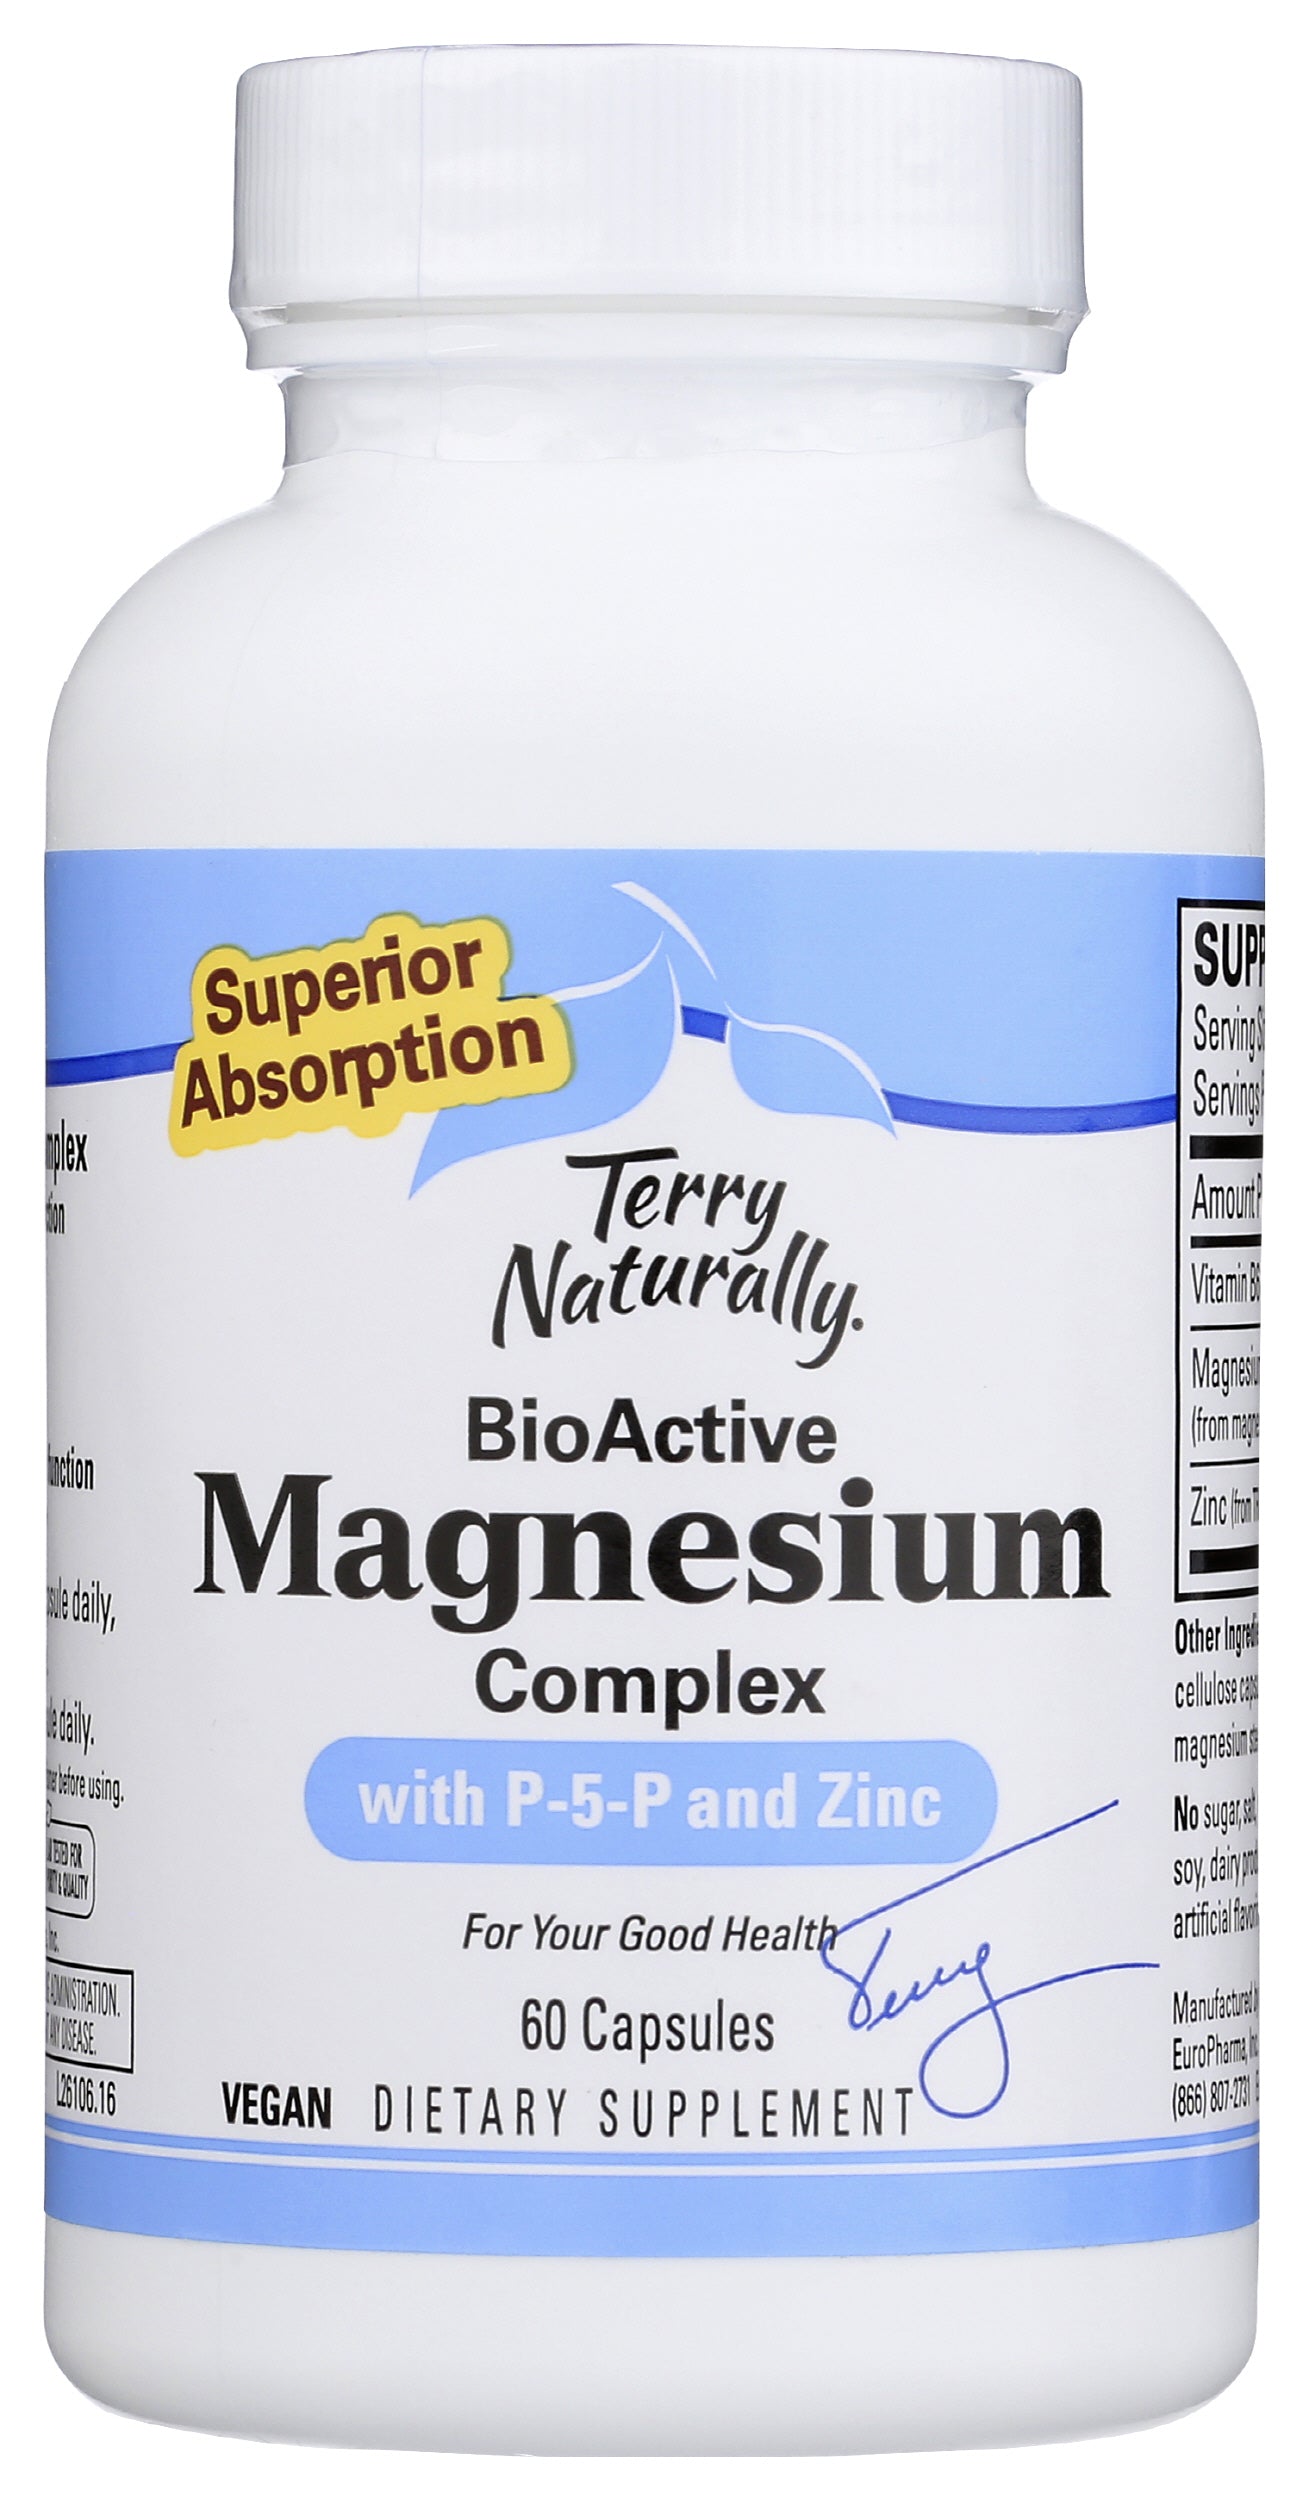 Terry Naturally BioActive Magnesium Complex w/ P-5-P and Zinc 60 Capsules